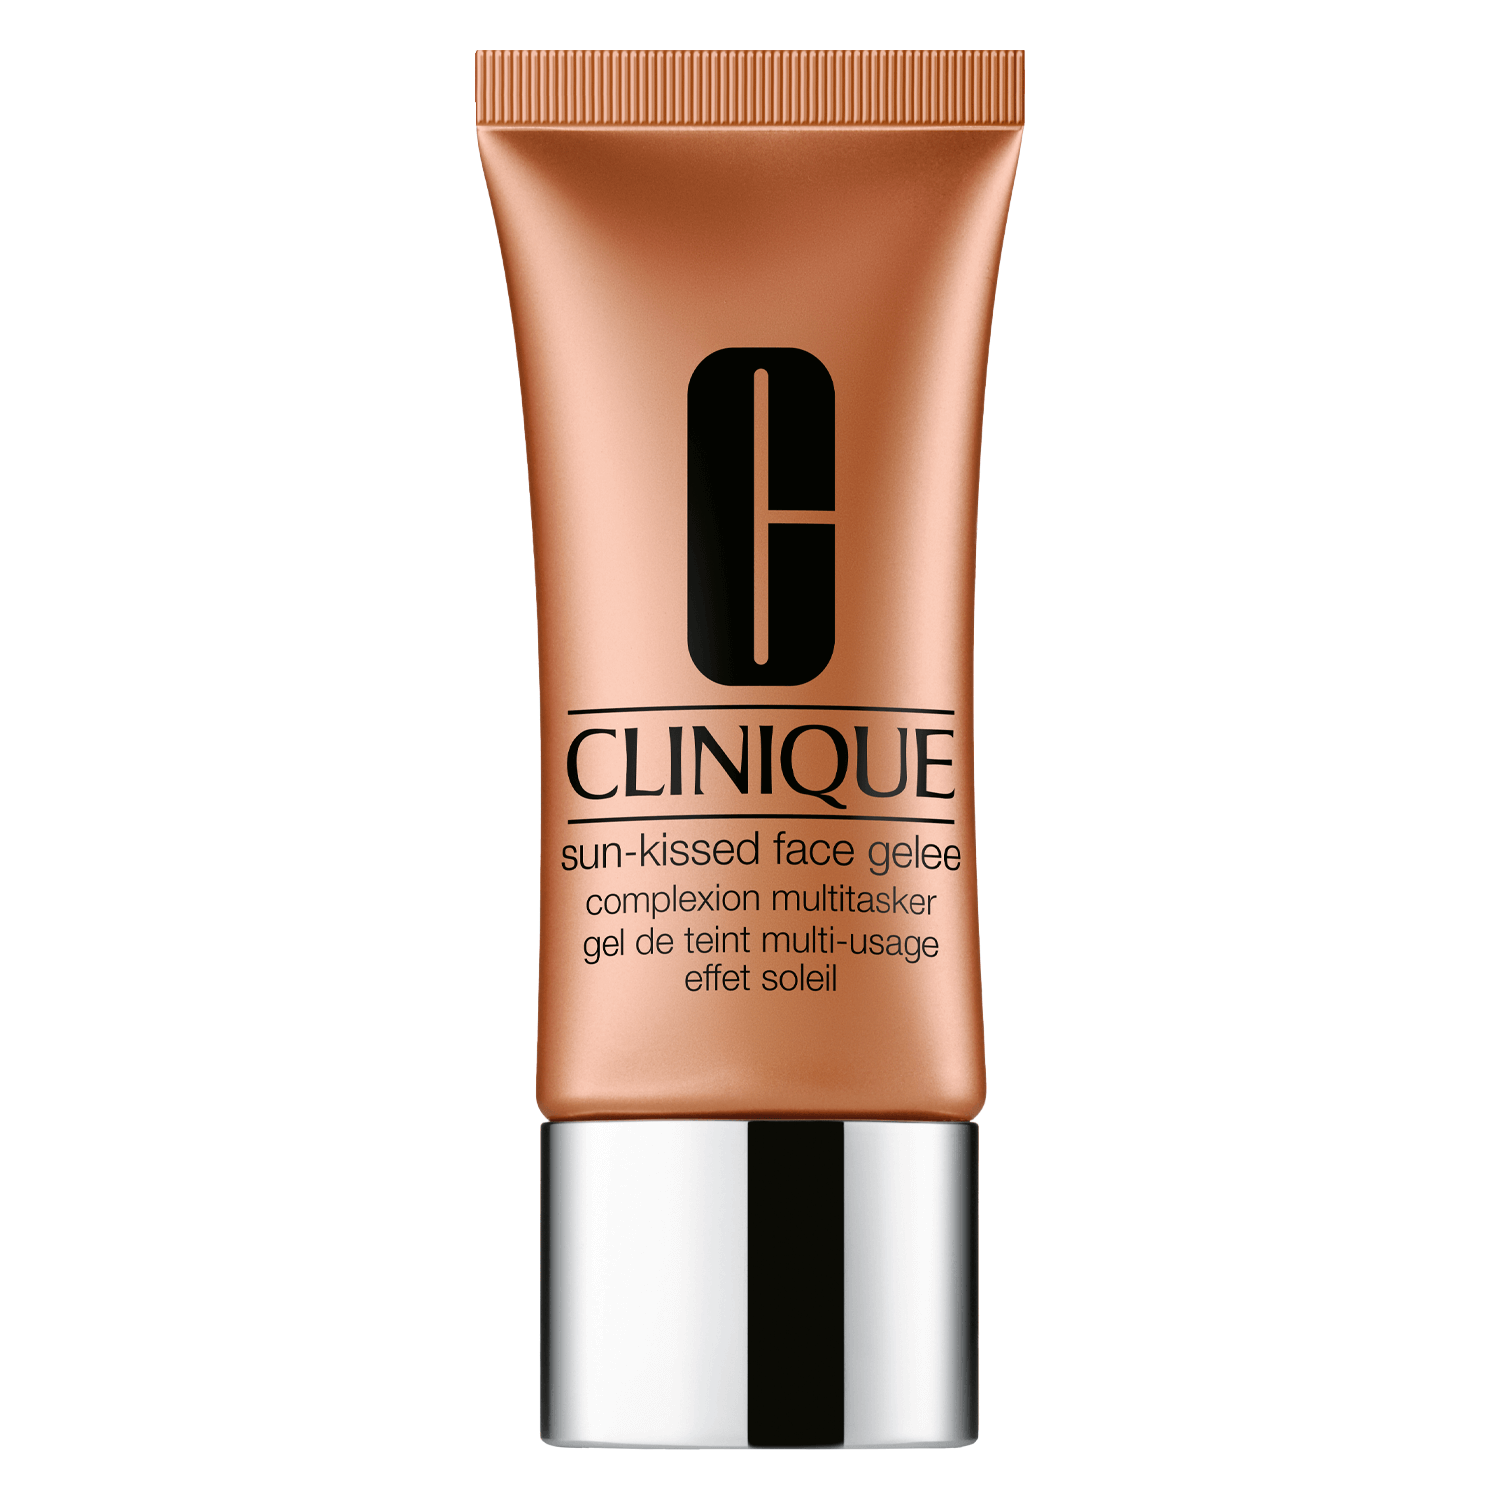 Product image from Clinique - Sun-Kissed Face Gelee Complexion Multitasker